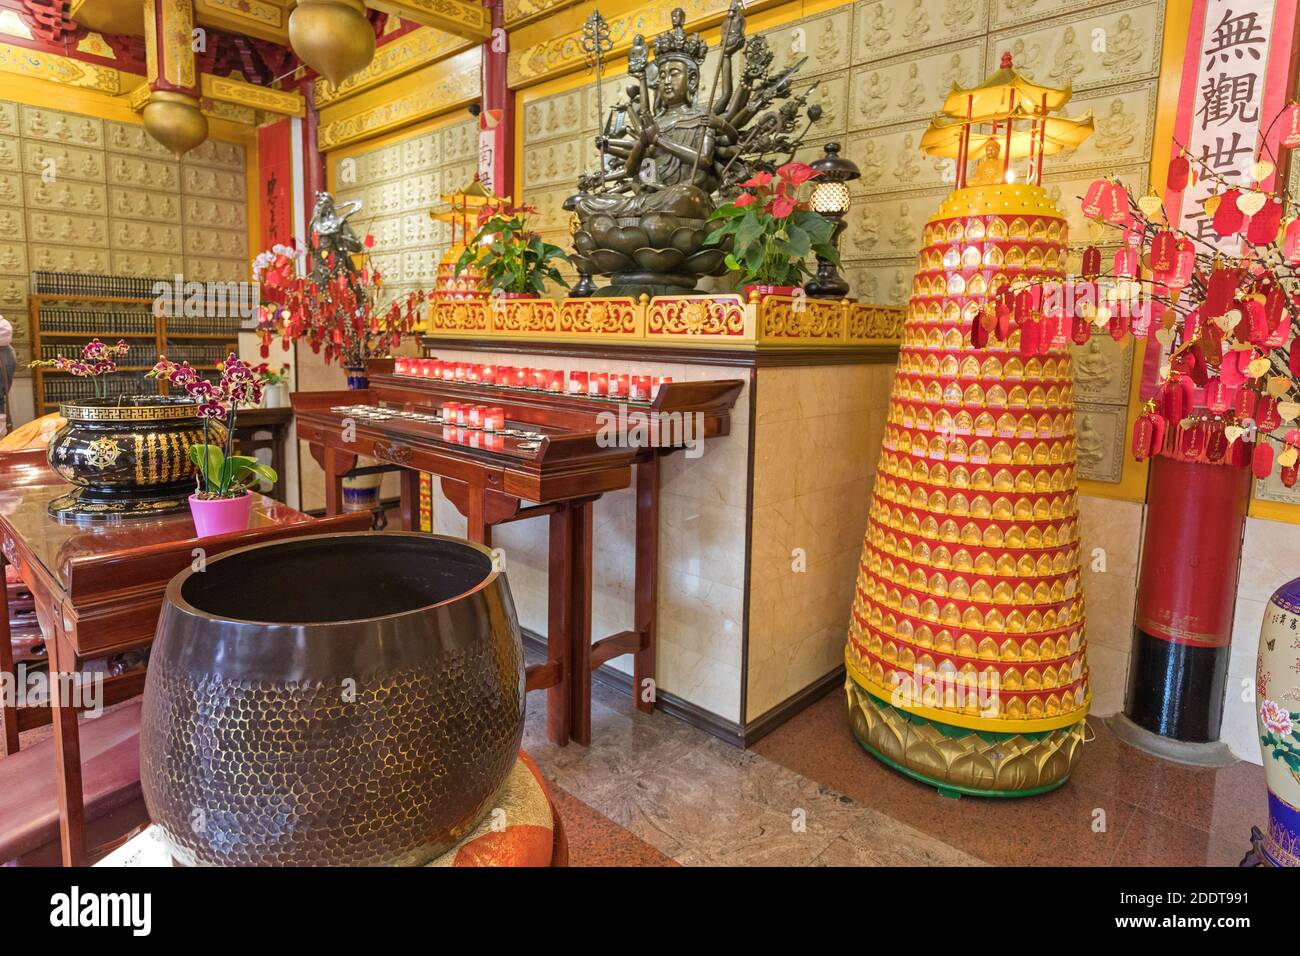 Amsterdam, Netherlands - May 18, 2018: Fo Guang Shan He Hua Buddhist Temple Interior in Amsterdam, Holland. Stock Photo